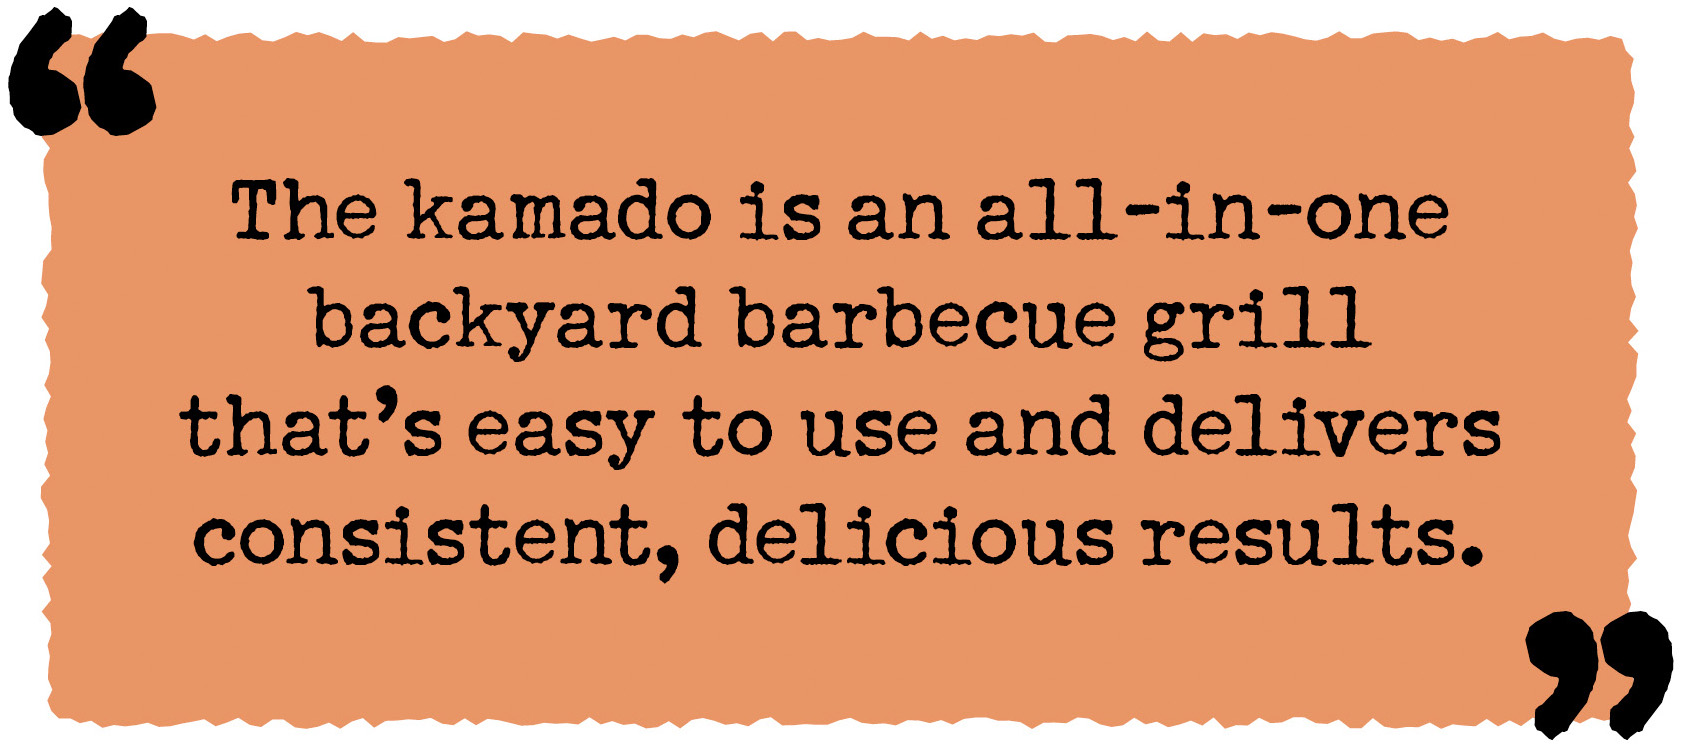 Kamado today In recent years the modern kamado grill has gained popularity - photo 11